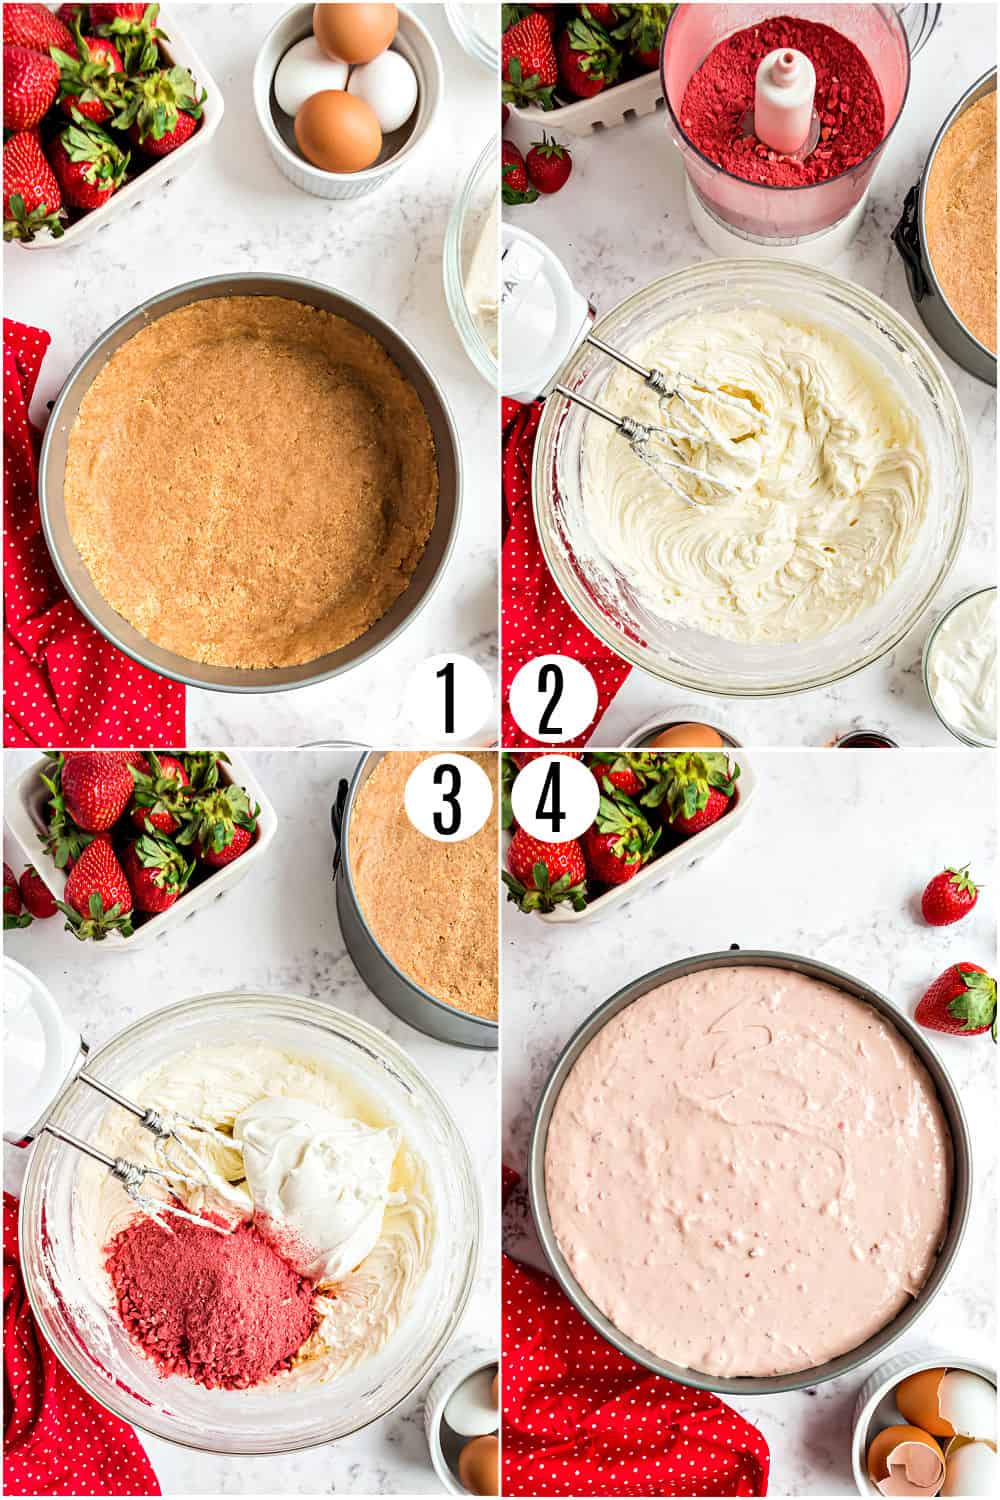 Step by step photos showing how to make strawberry cheesecake.